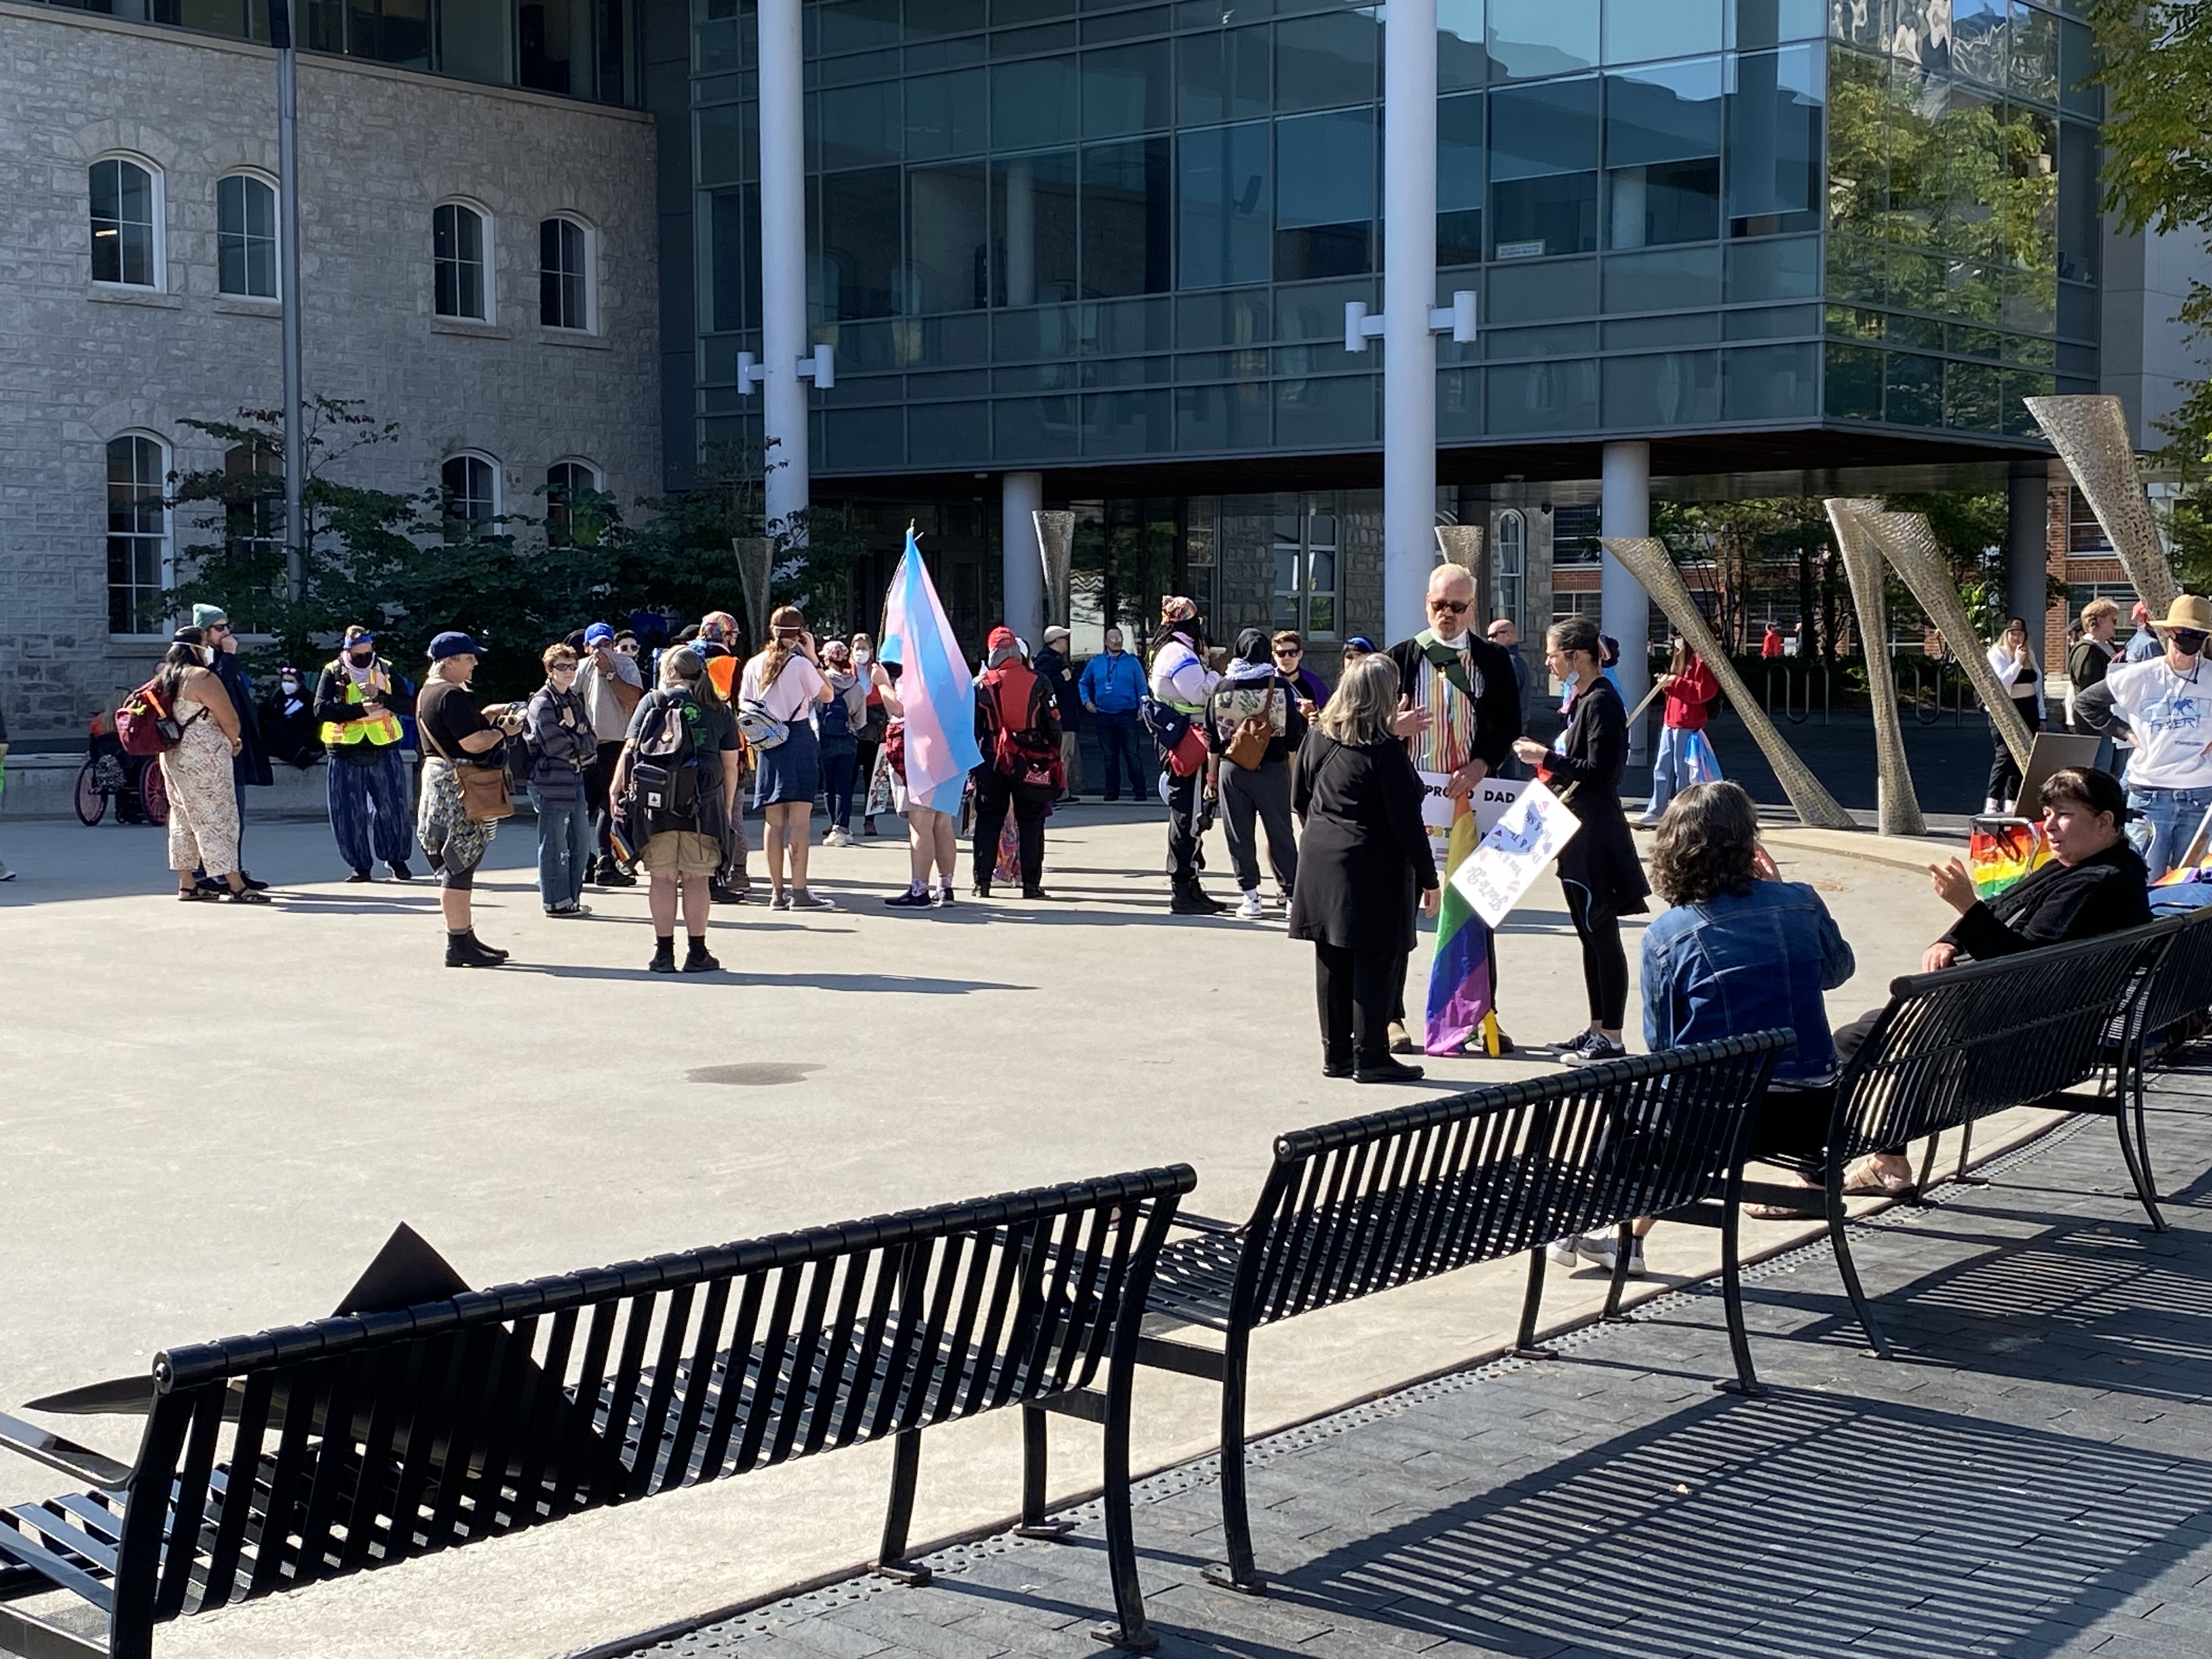 Guelph to draft new bylaw regarding use of public space